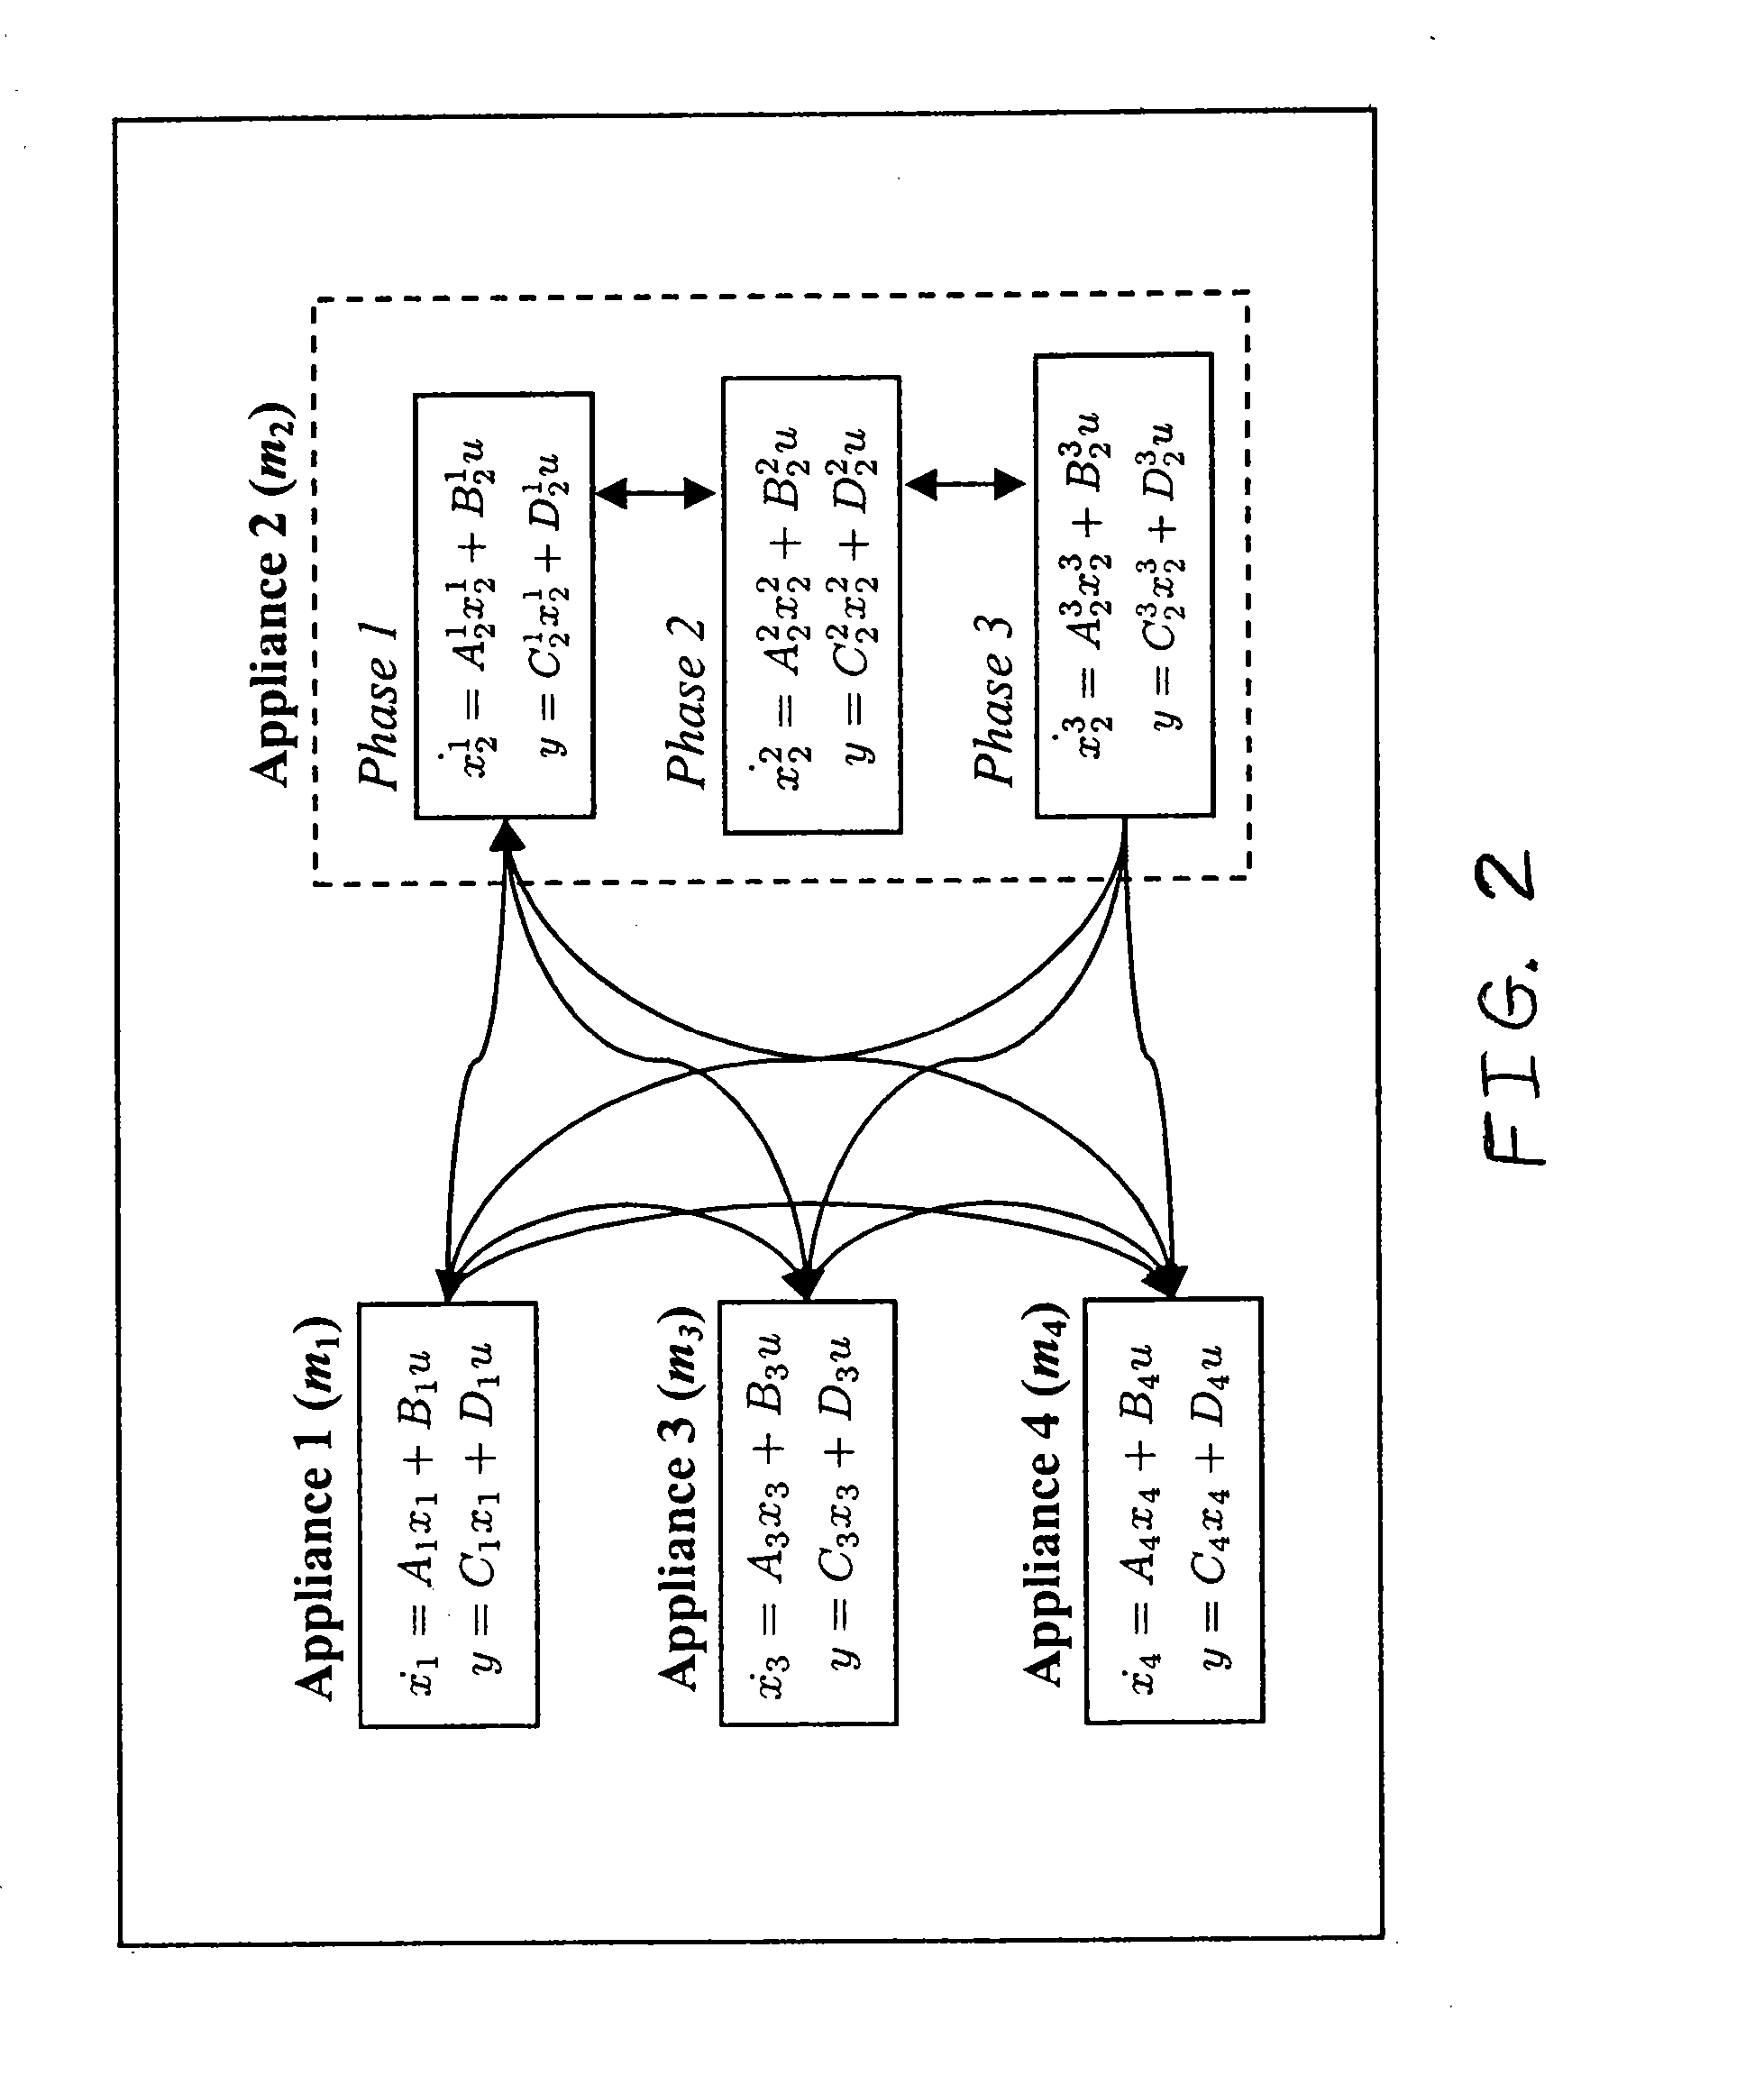 Method for non-intrusive load monitoring using a hybrid systems state estimation approach